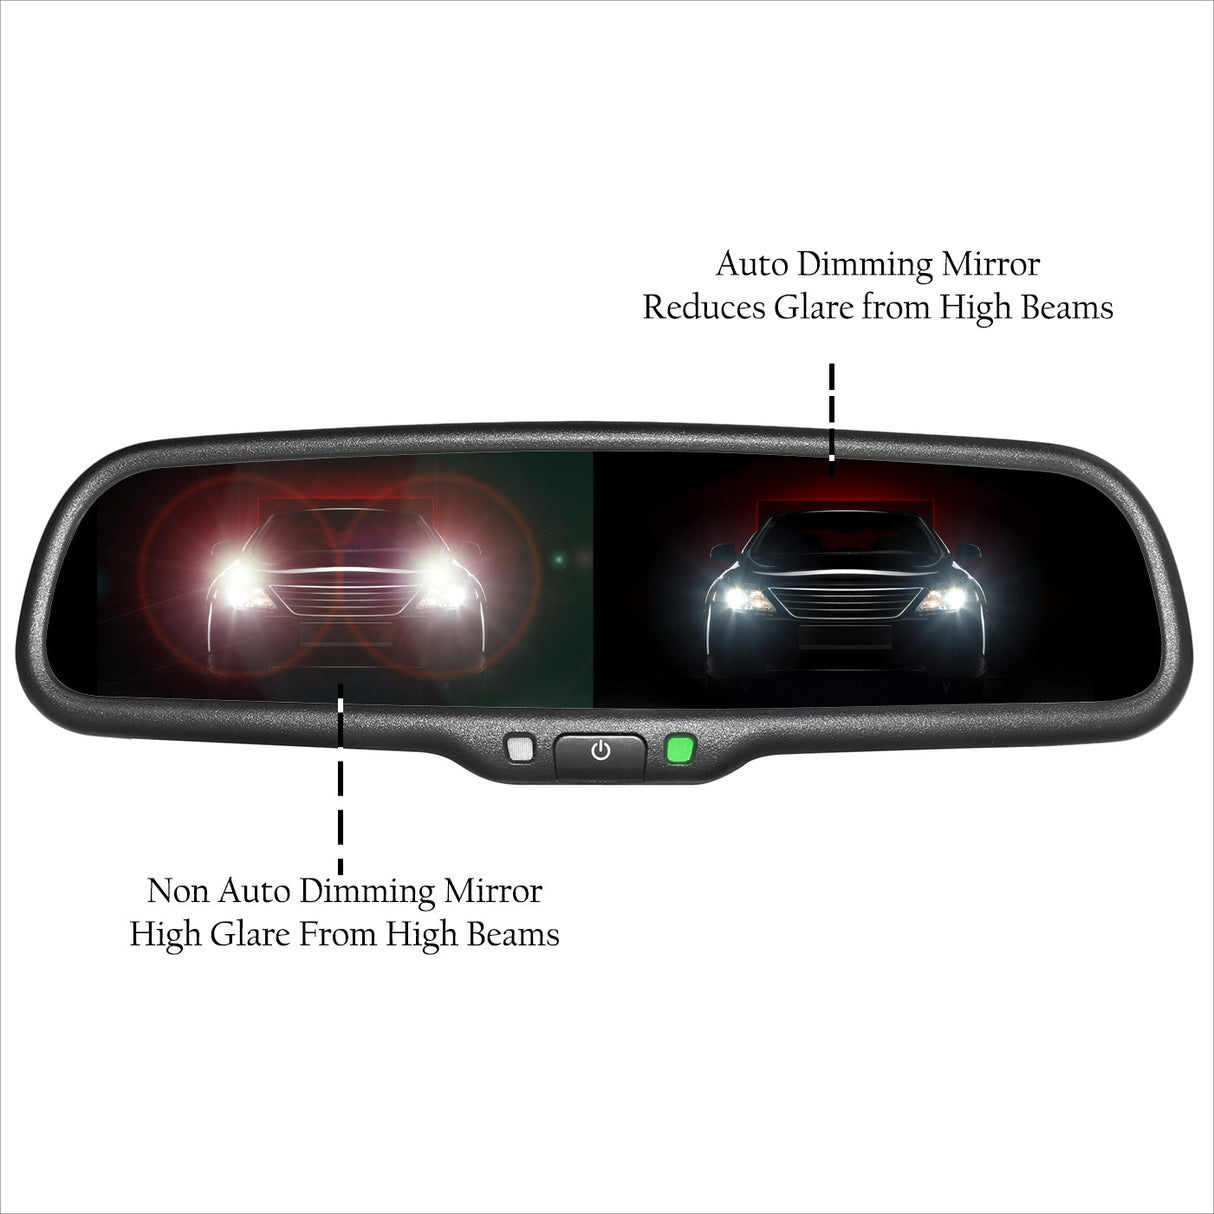 Highsider Action 1108383 Rearview Mirrors Set Black